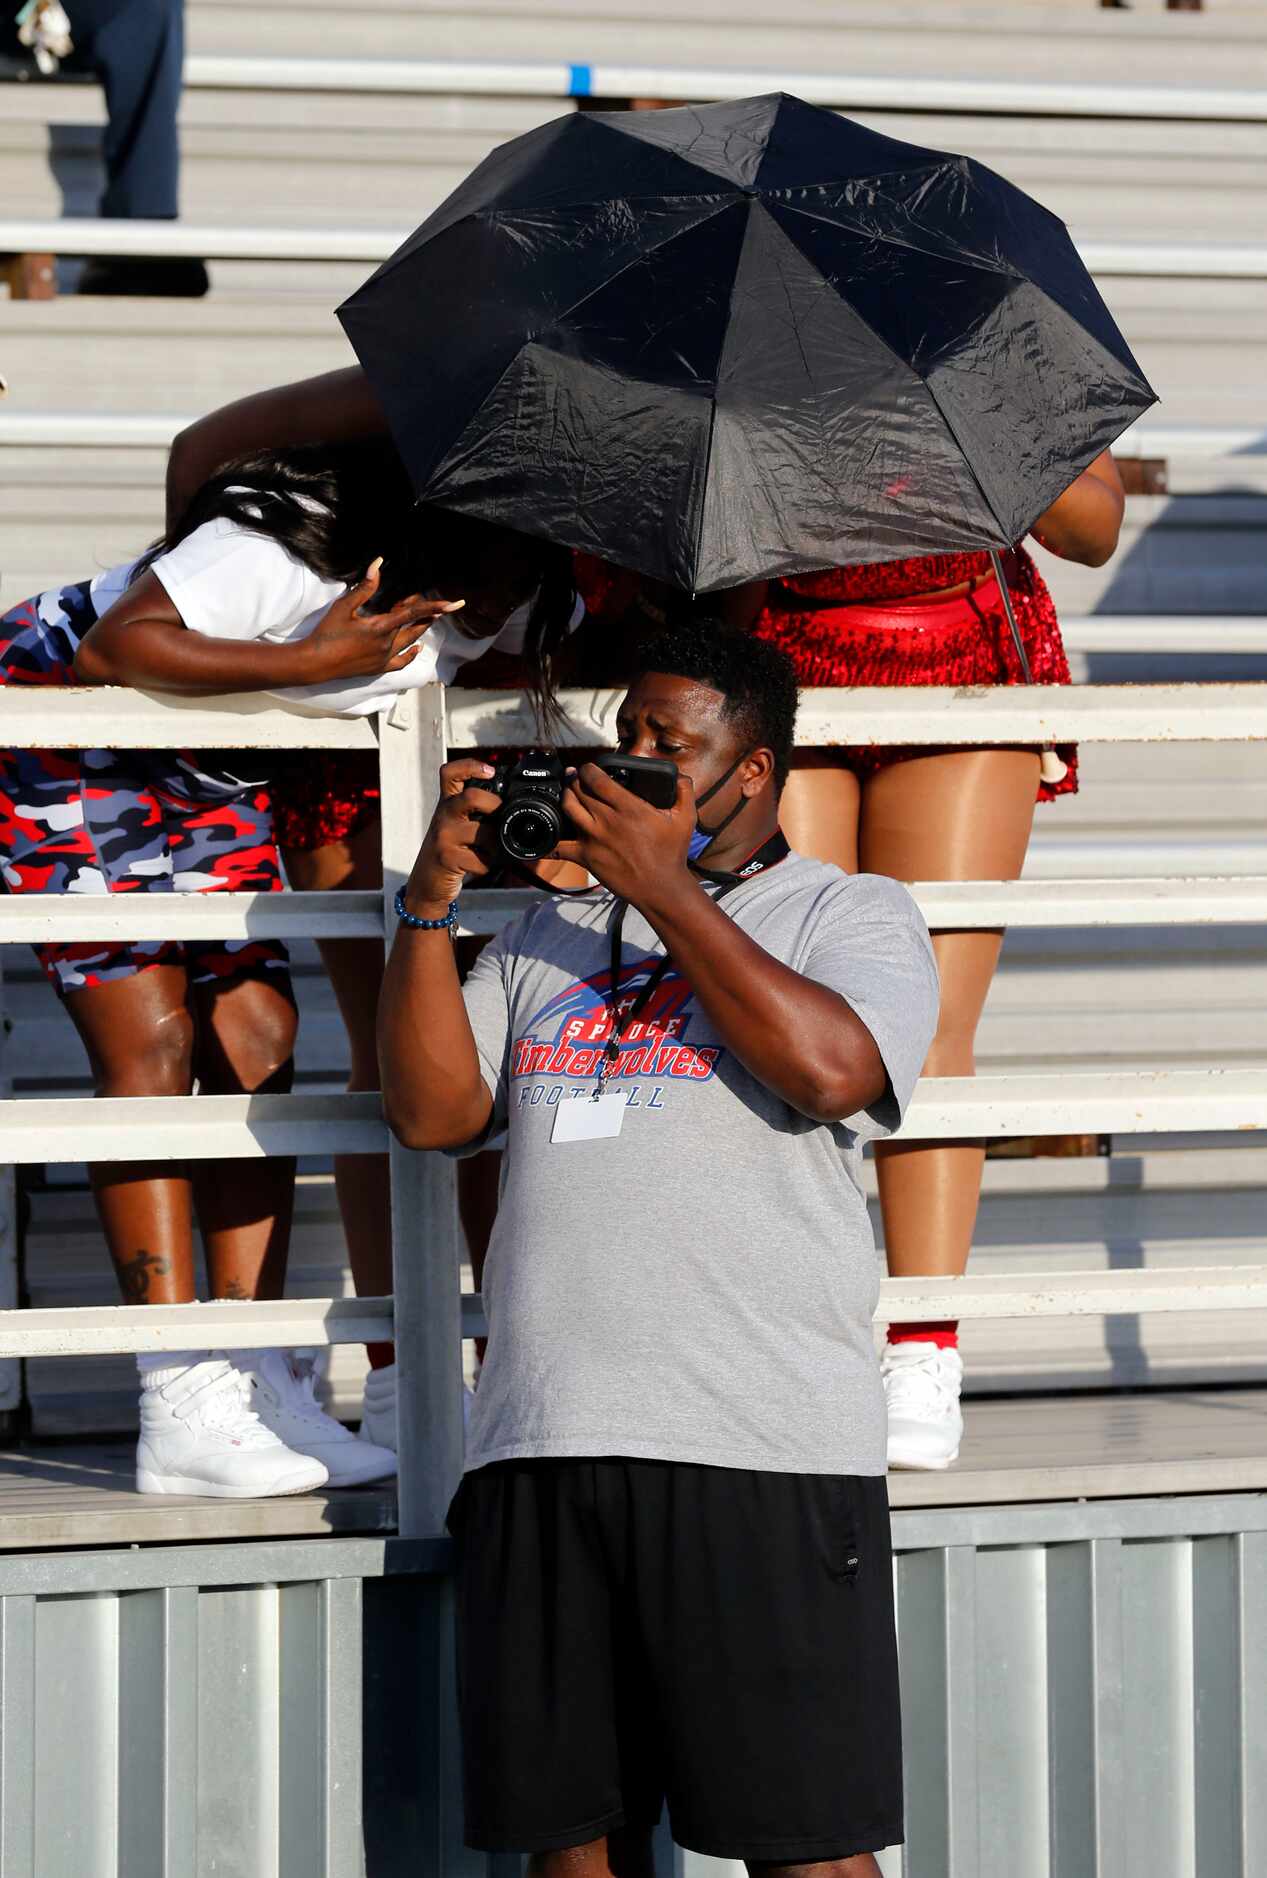 A photographer shows a photo to two women under umbrellas before the first half of the...